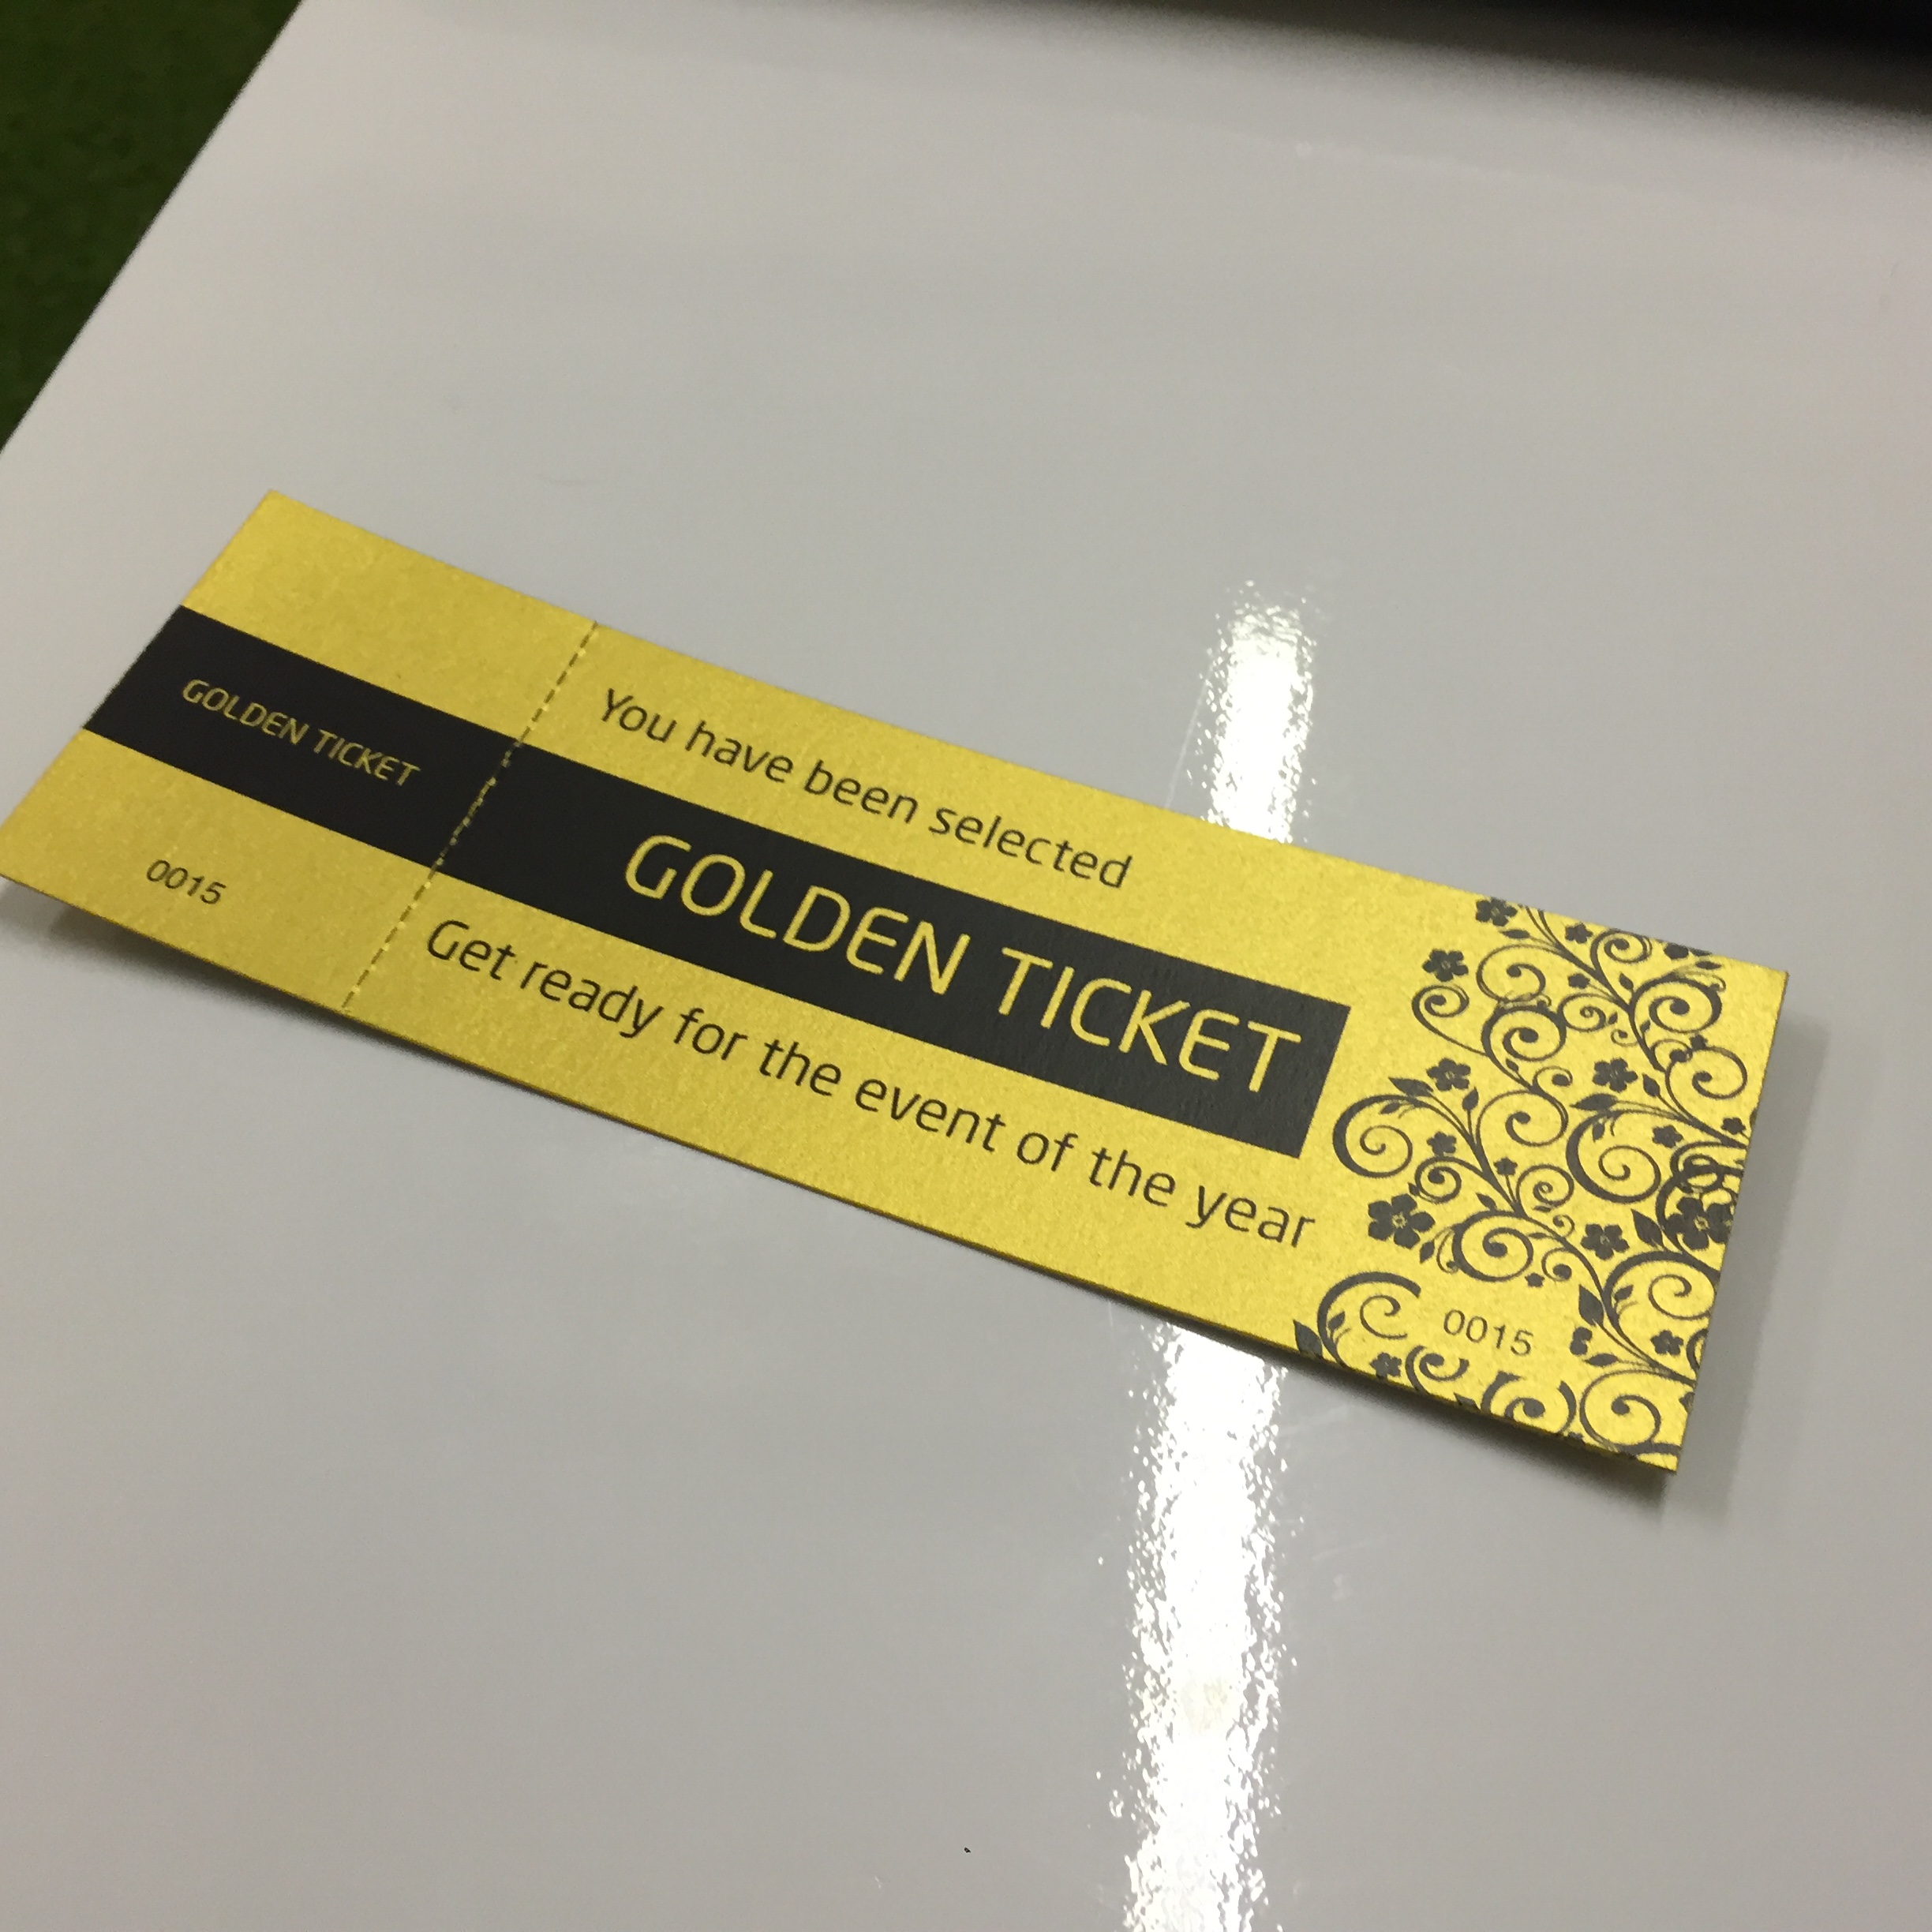 gold-ticket-printing-uk-free-delivery-free-online-design-software